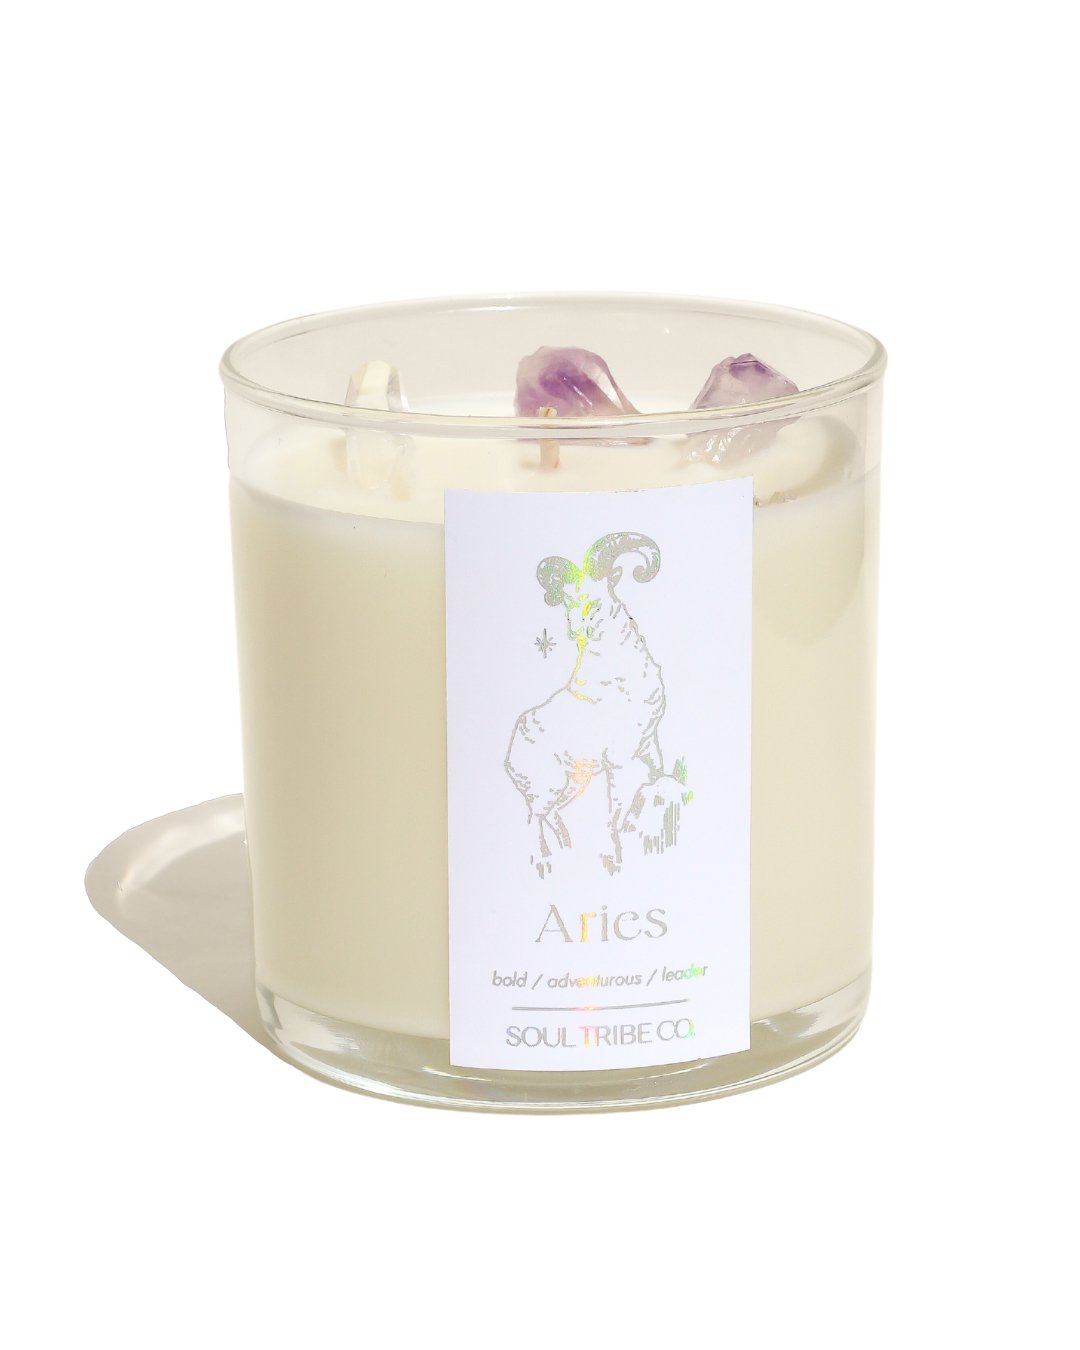 Aries Candle - Soul Tribe Co.